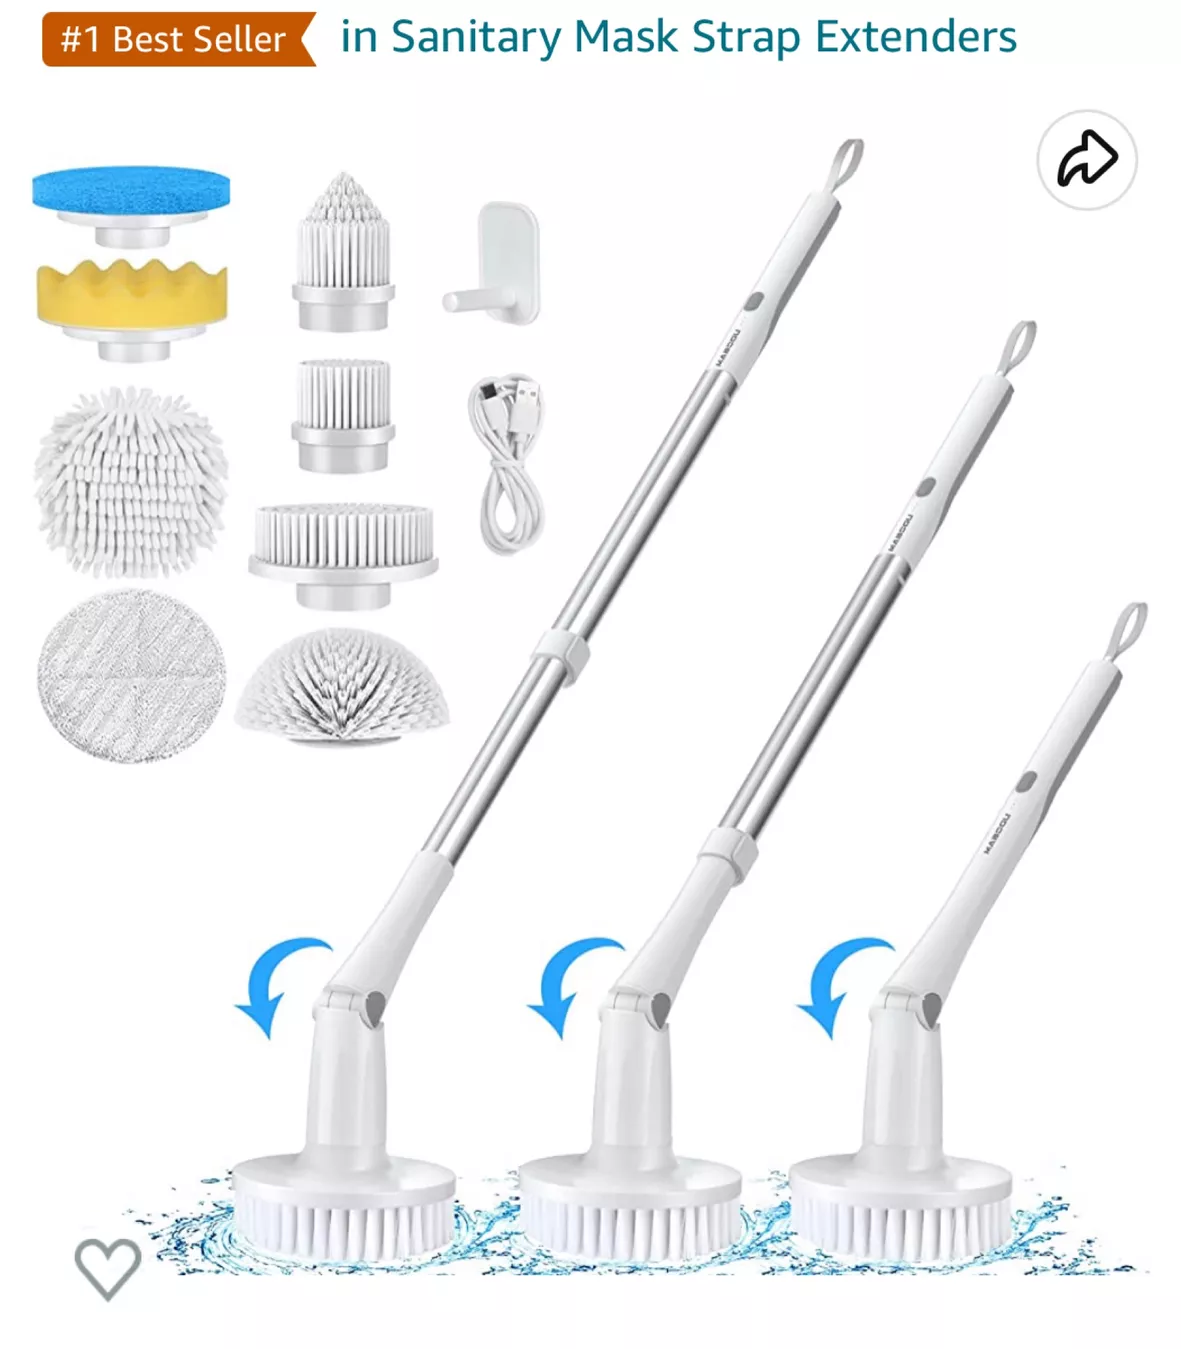 Electric Spin Scrubber, Cordless Cleaning Brush Tub Tile Scrubber